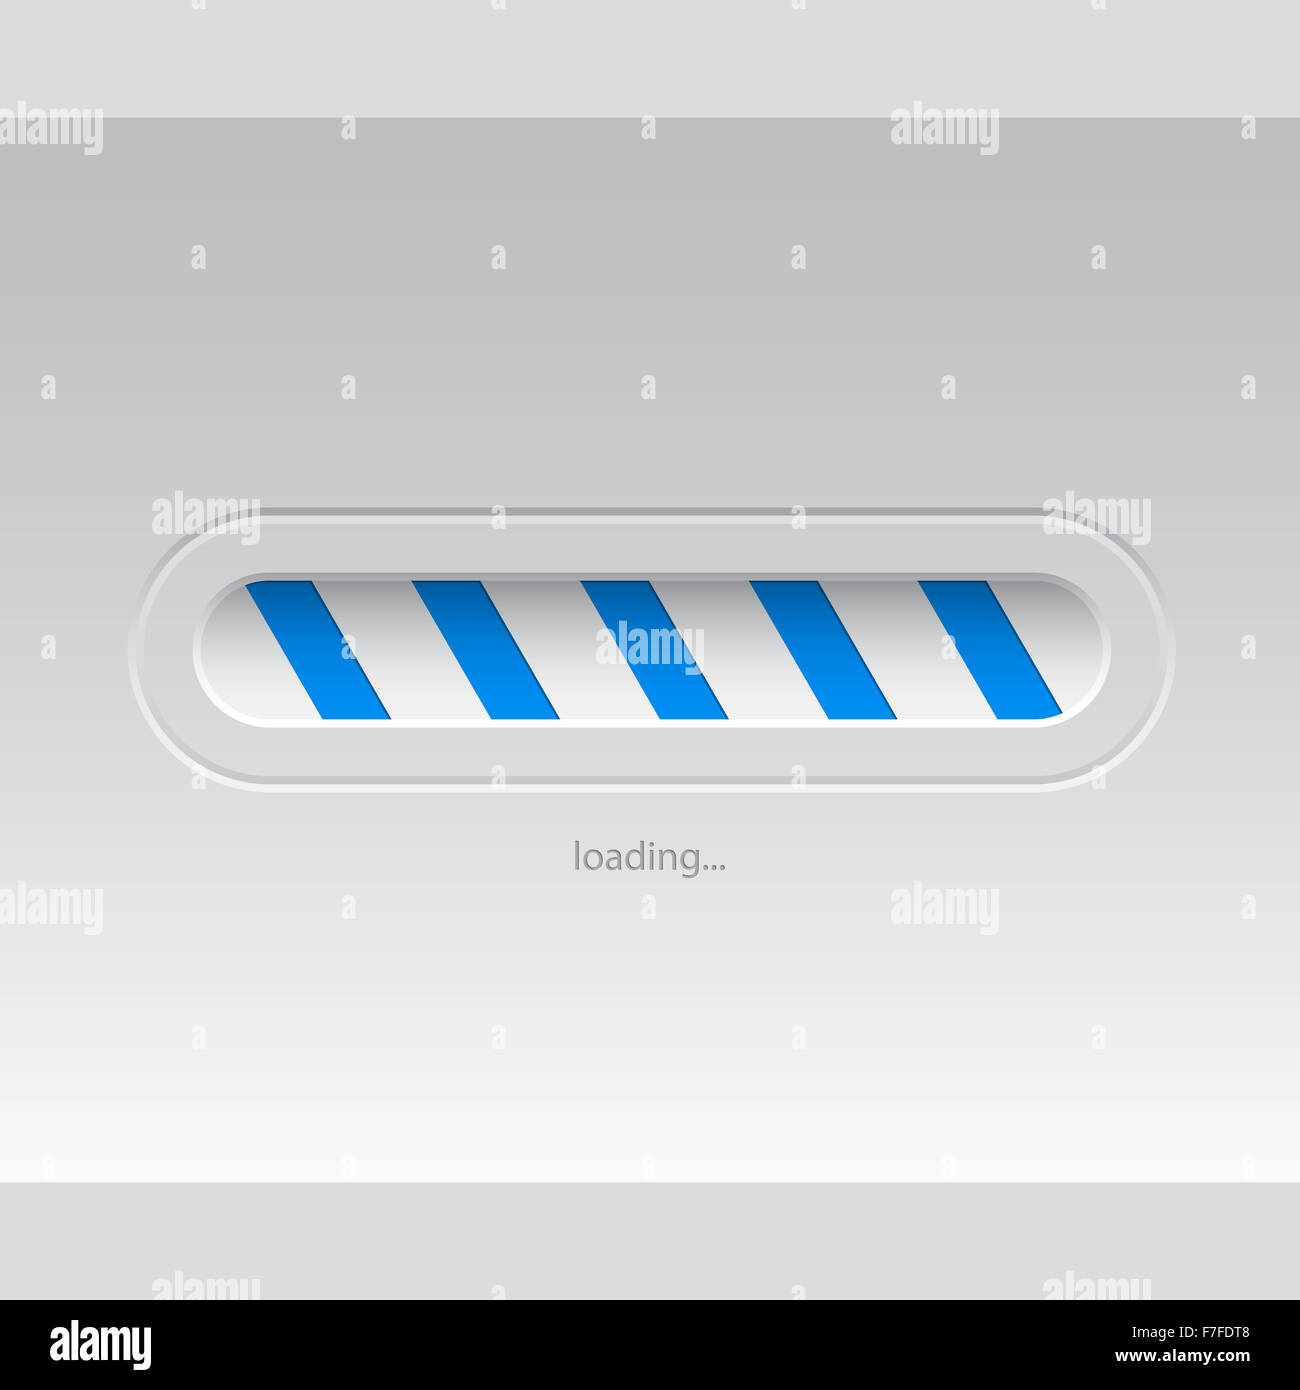 Simplistic flat loader design with blue stripes Stock Photo